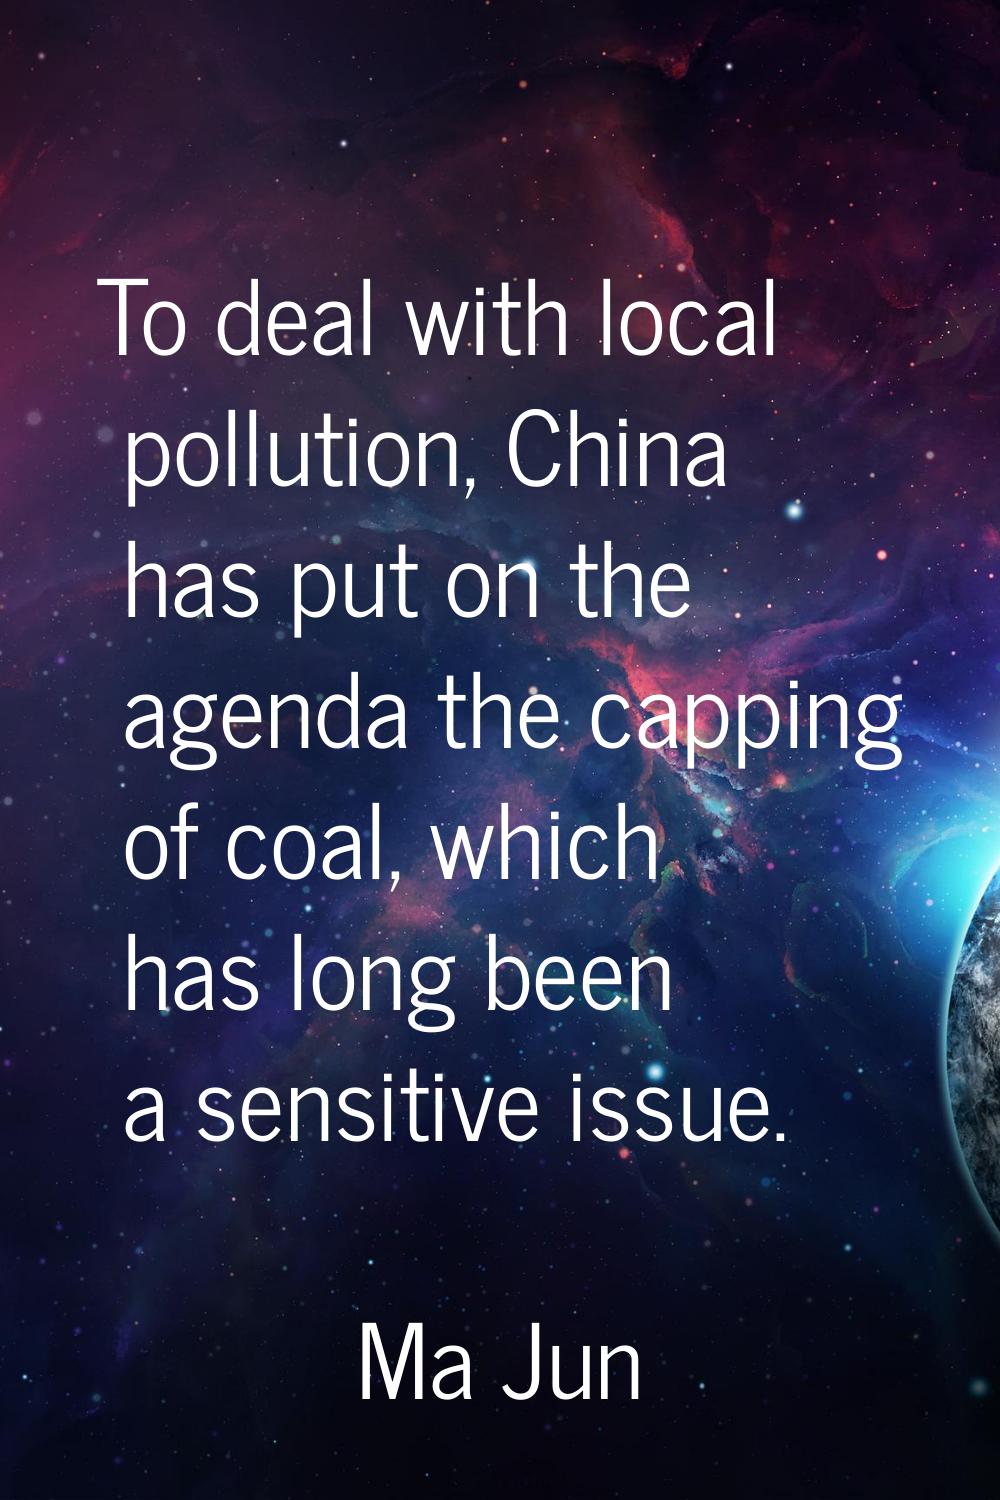 To deal with local pollution, China has put on the agenda the capping of coal, which has long been 